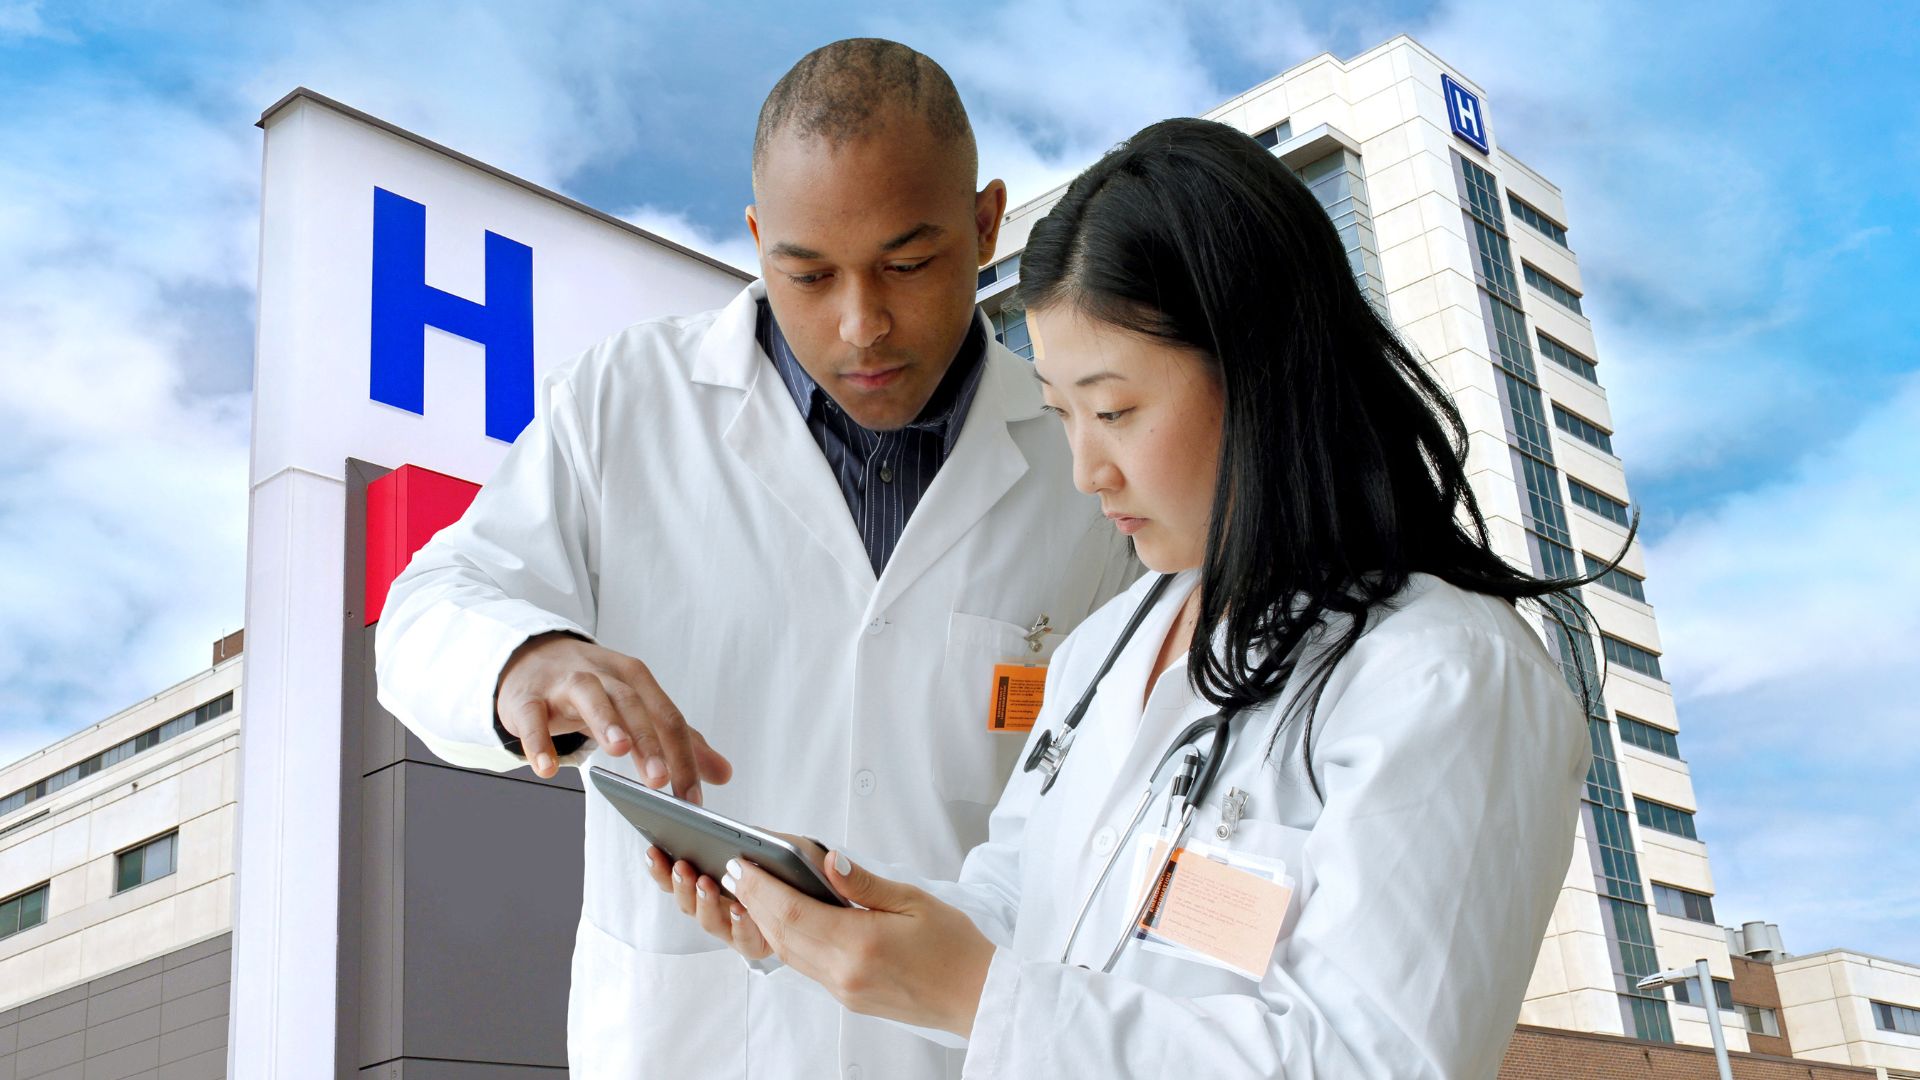 A man and woman in white coats examining a tablet, possibly discussing medical information.